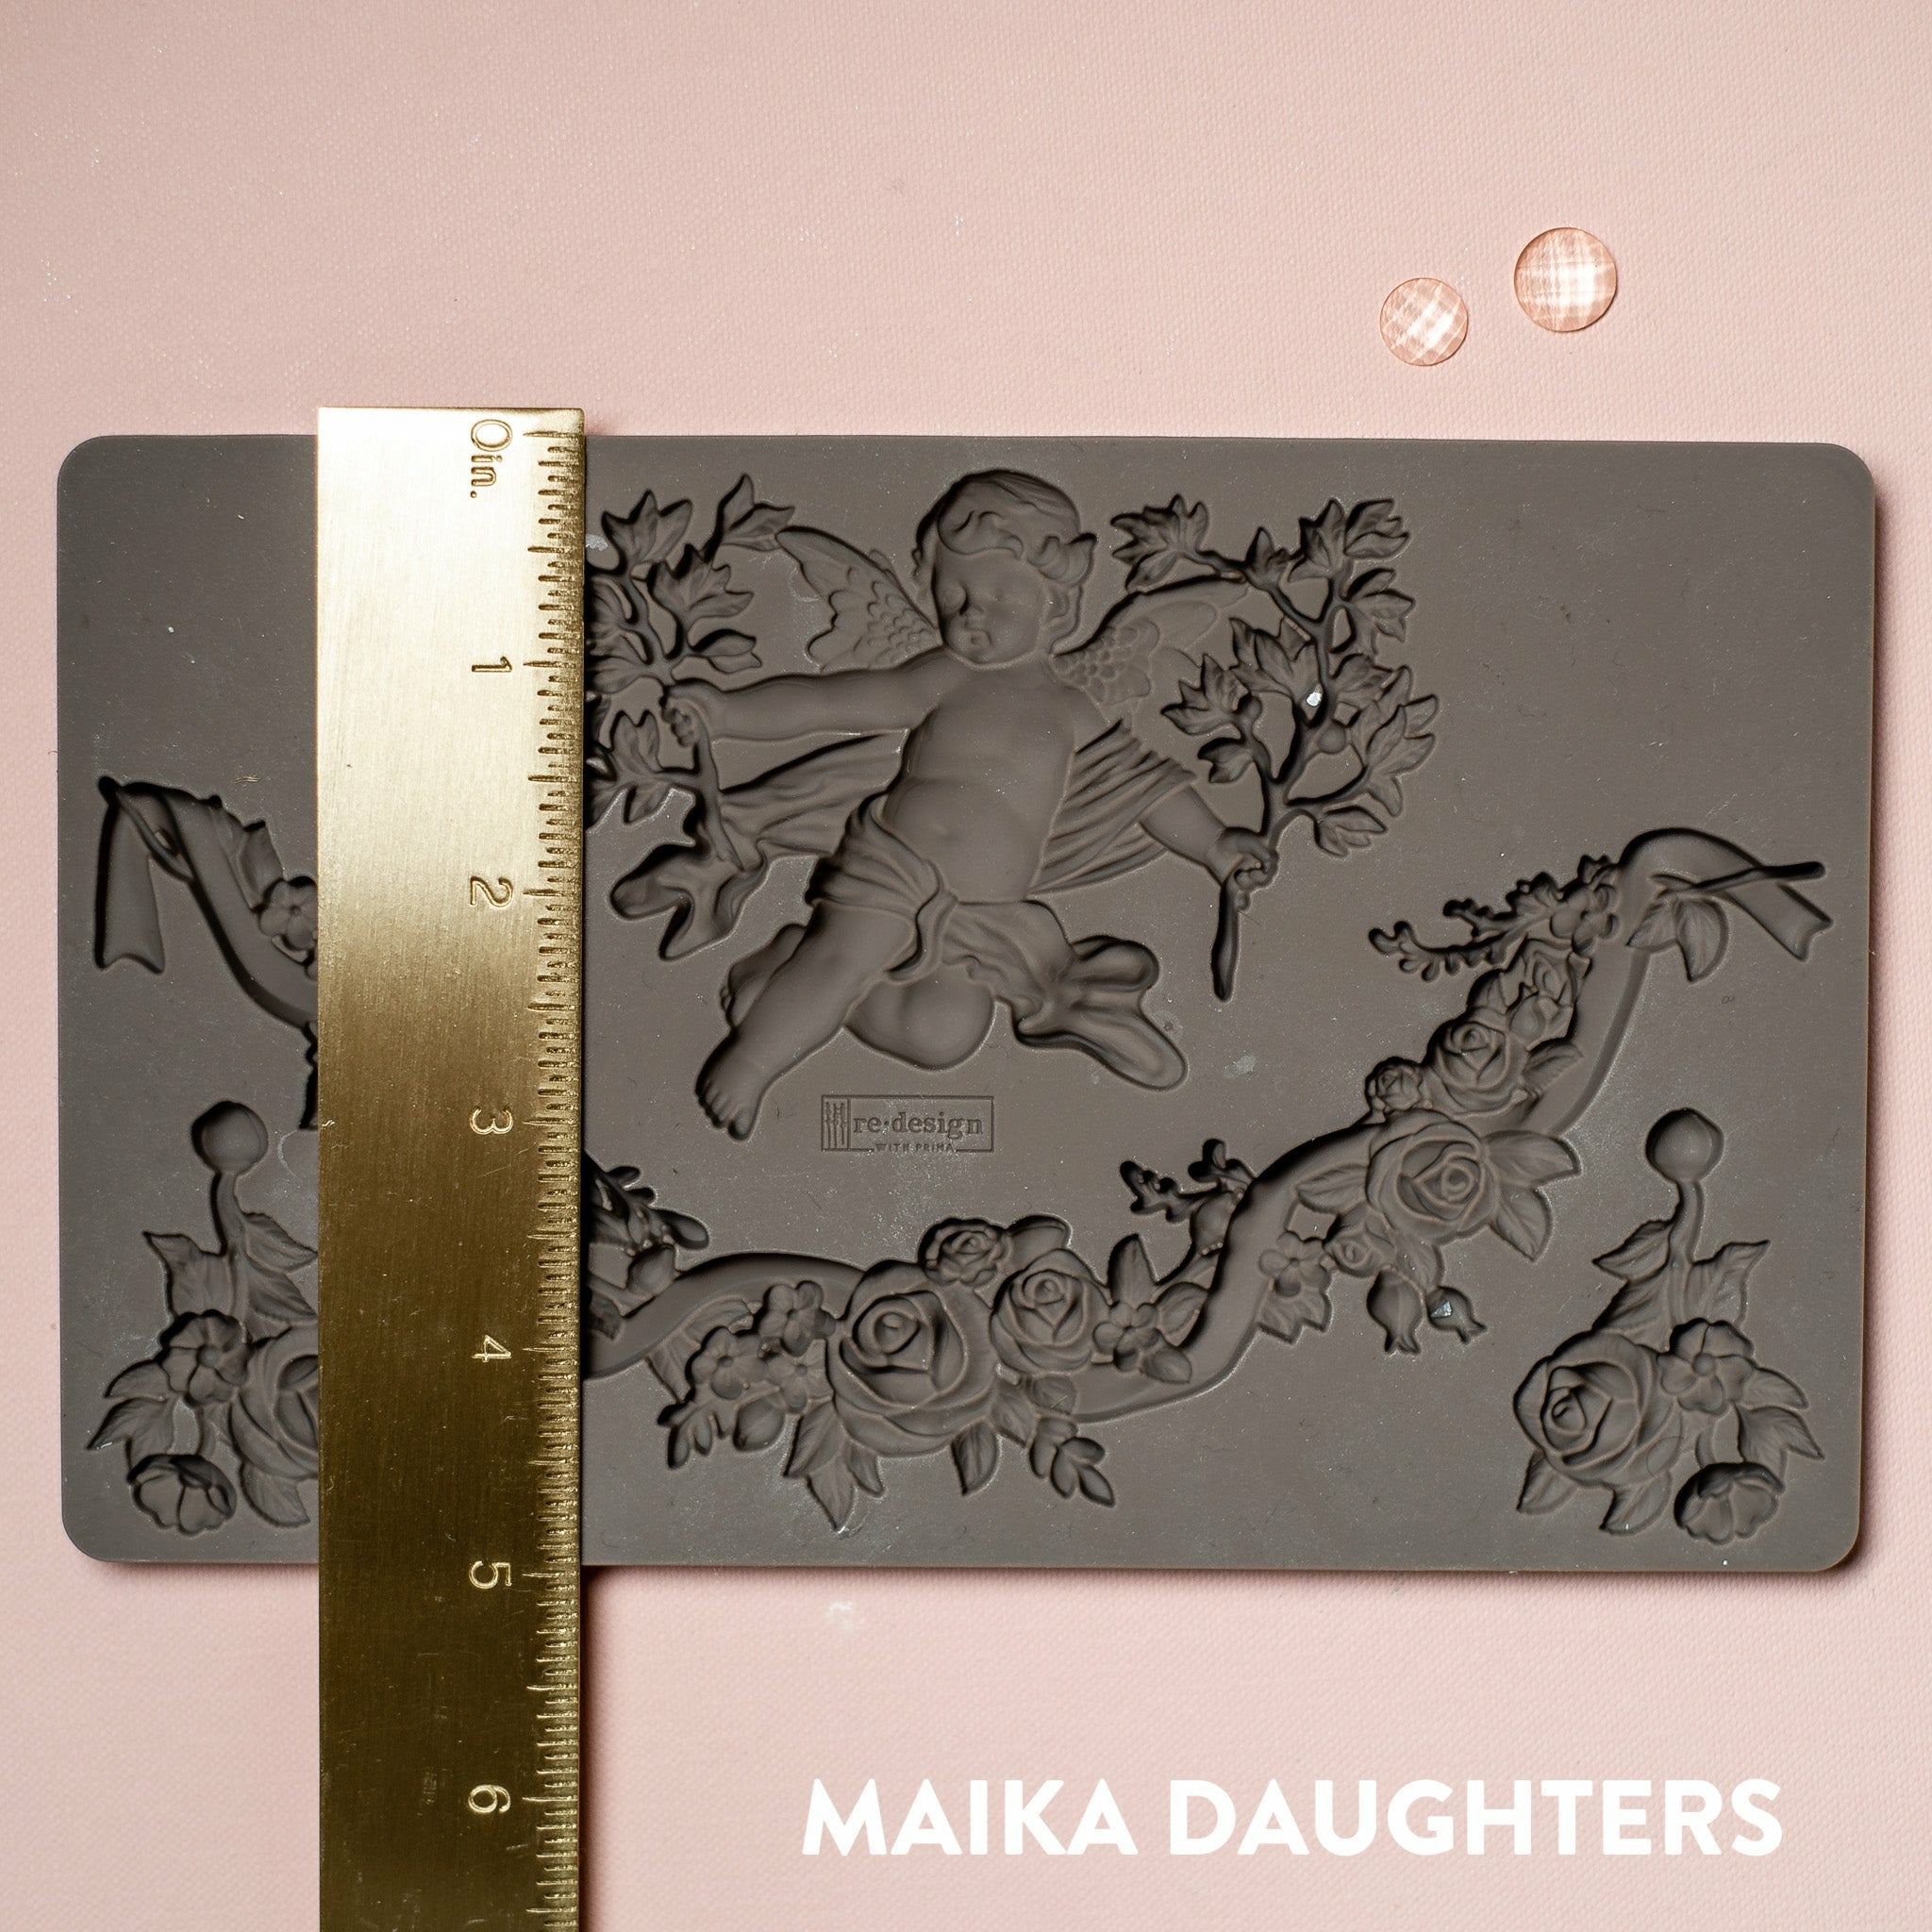 A brown silicone mould of ReDesign with Prima's Divine Floral silicone mould is on a light pink background. A gold ruler reading 5 inches sits on the mould.